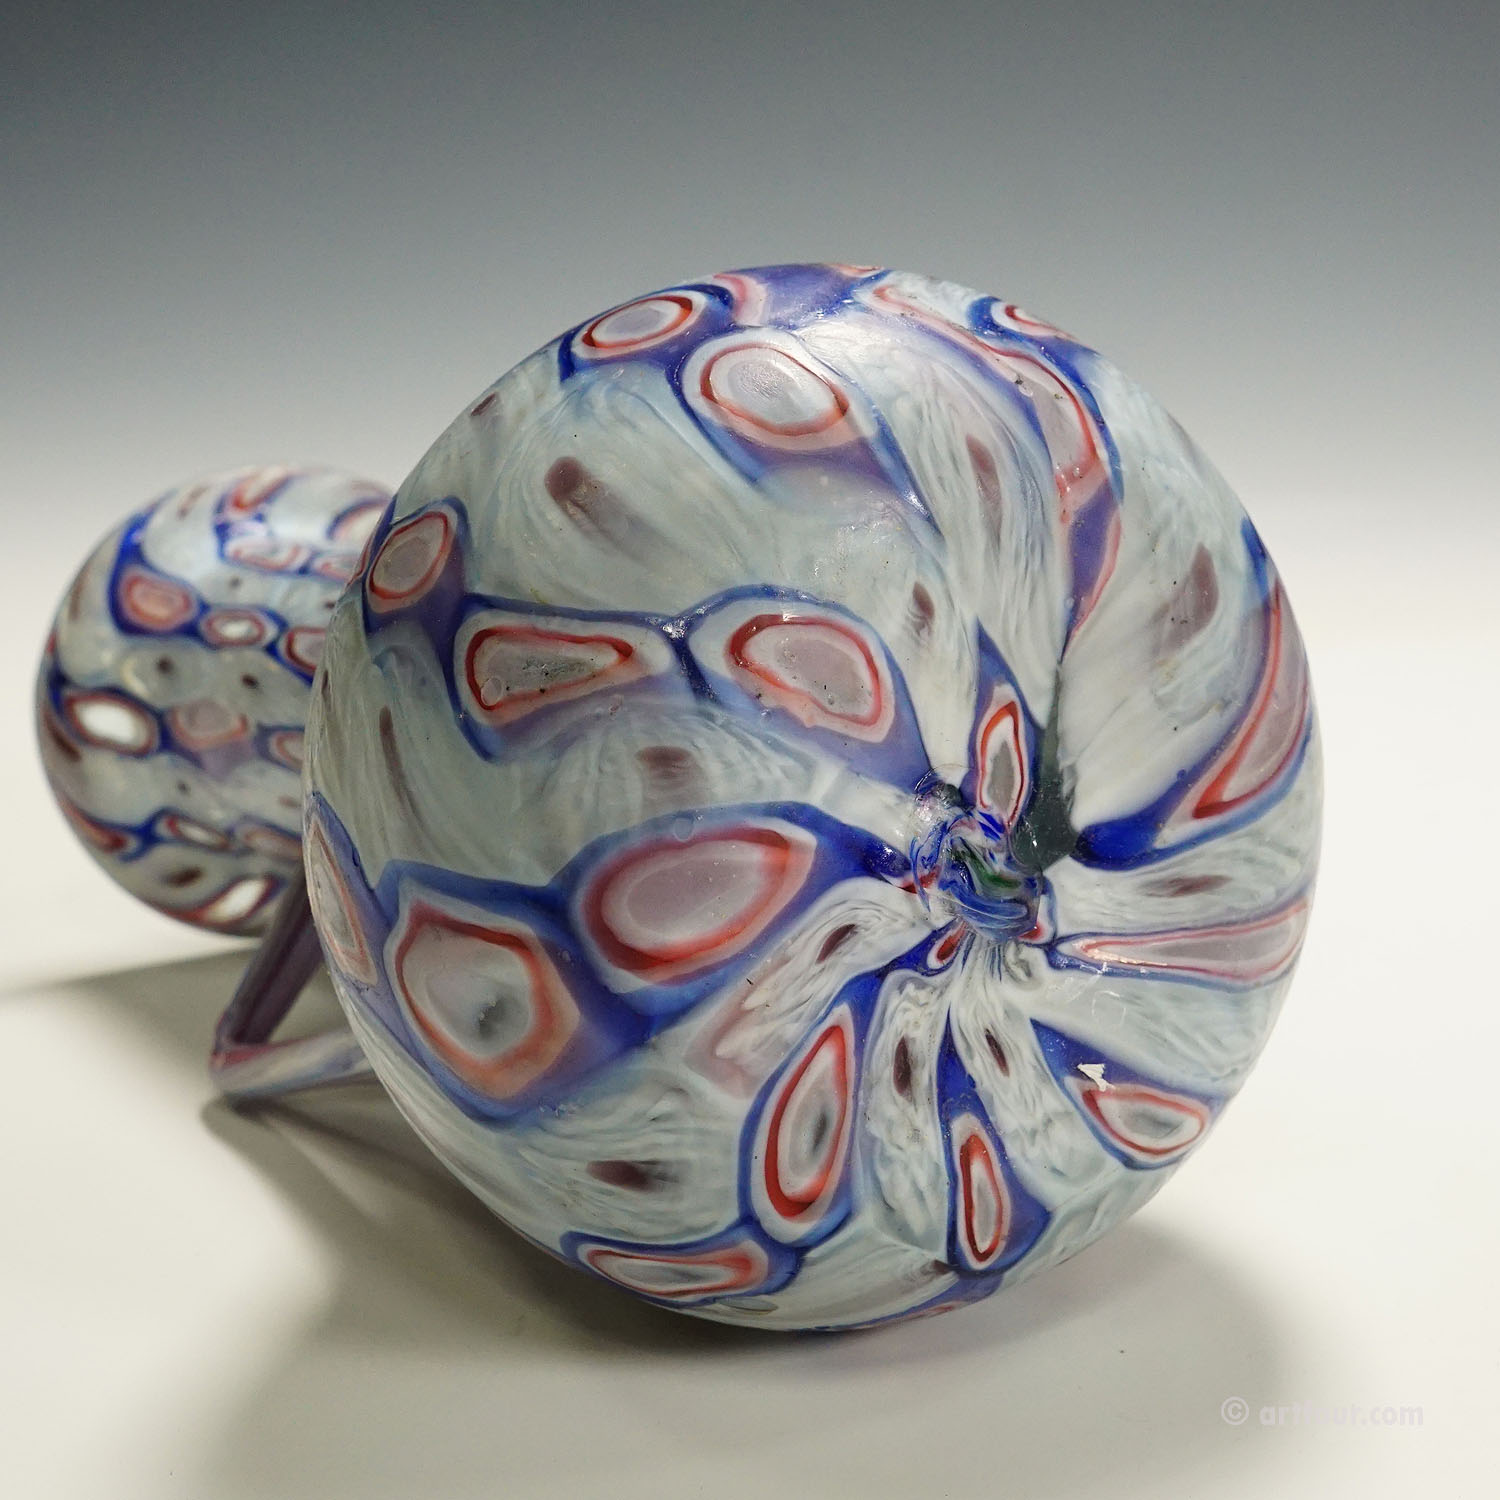 Large Millefiori Vase with Handles by Fratelli Toso, Murano circa 1920s